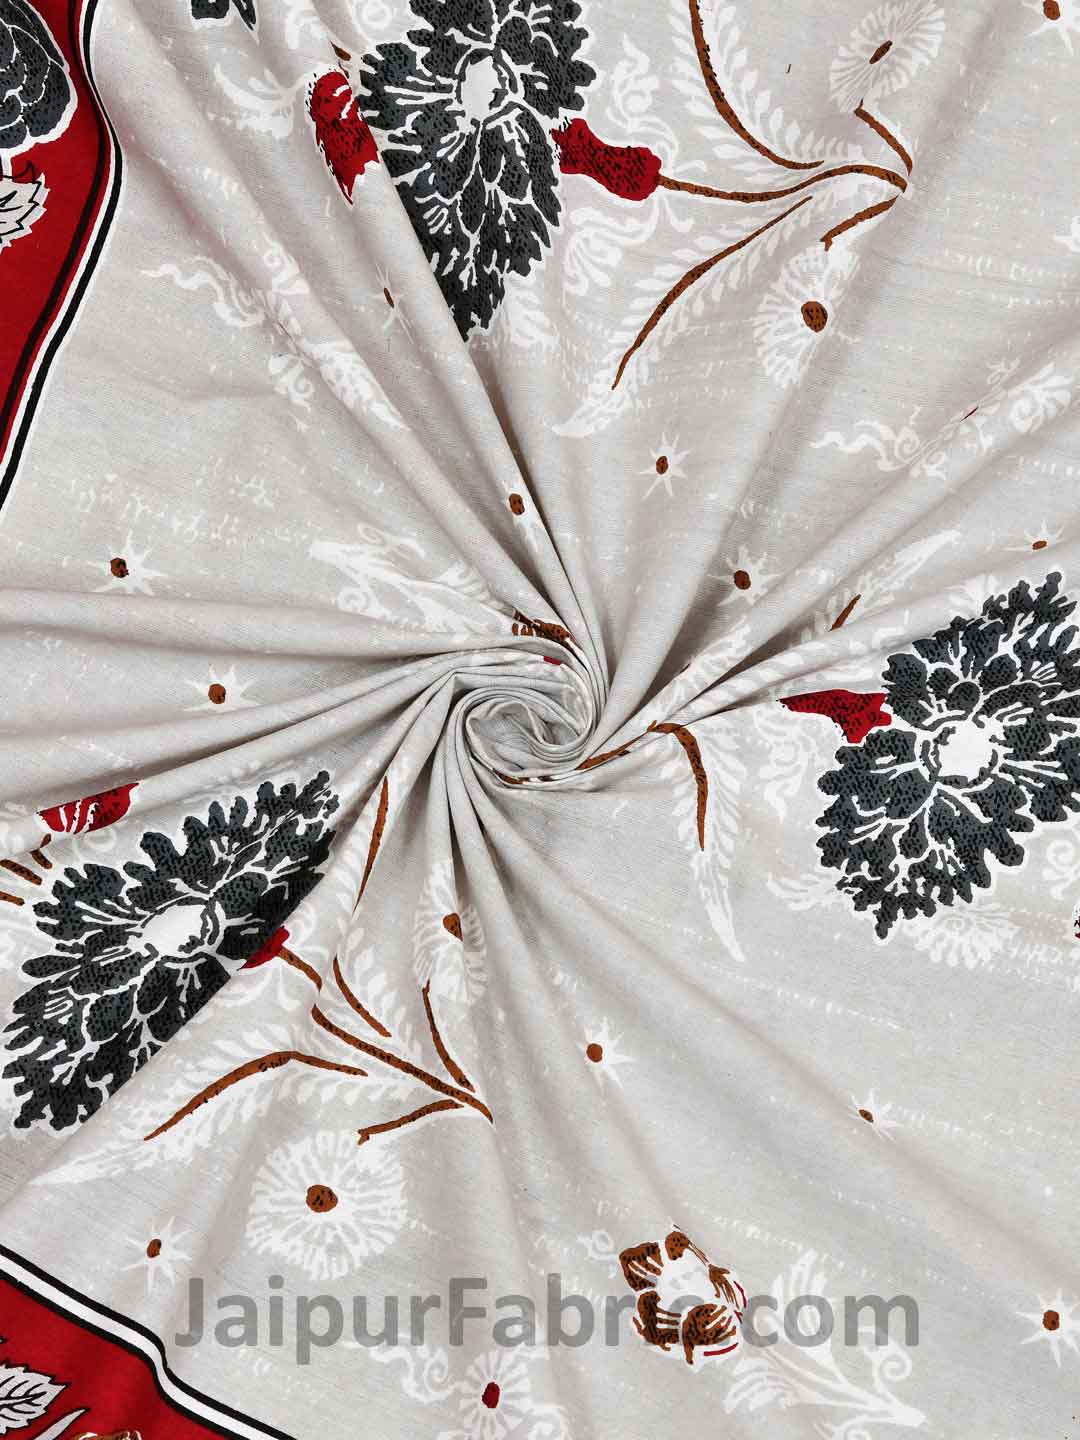 Carnations Red Floral Pure Cotton Double Bedsheet